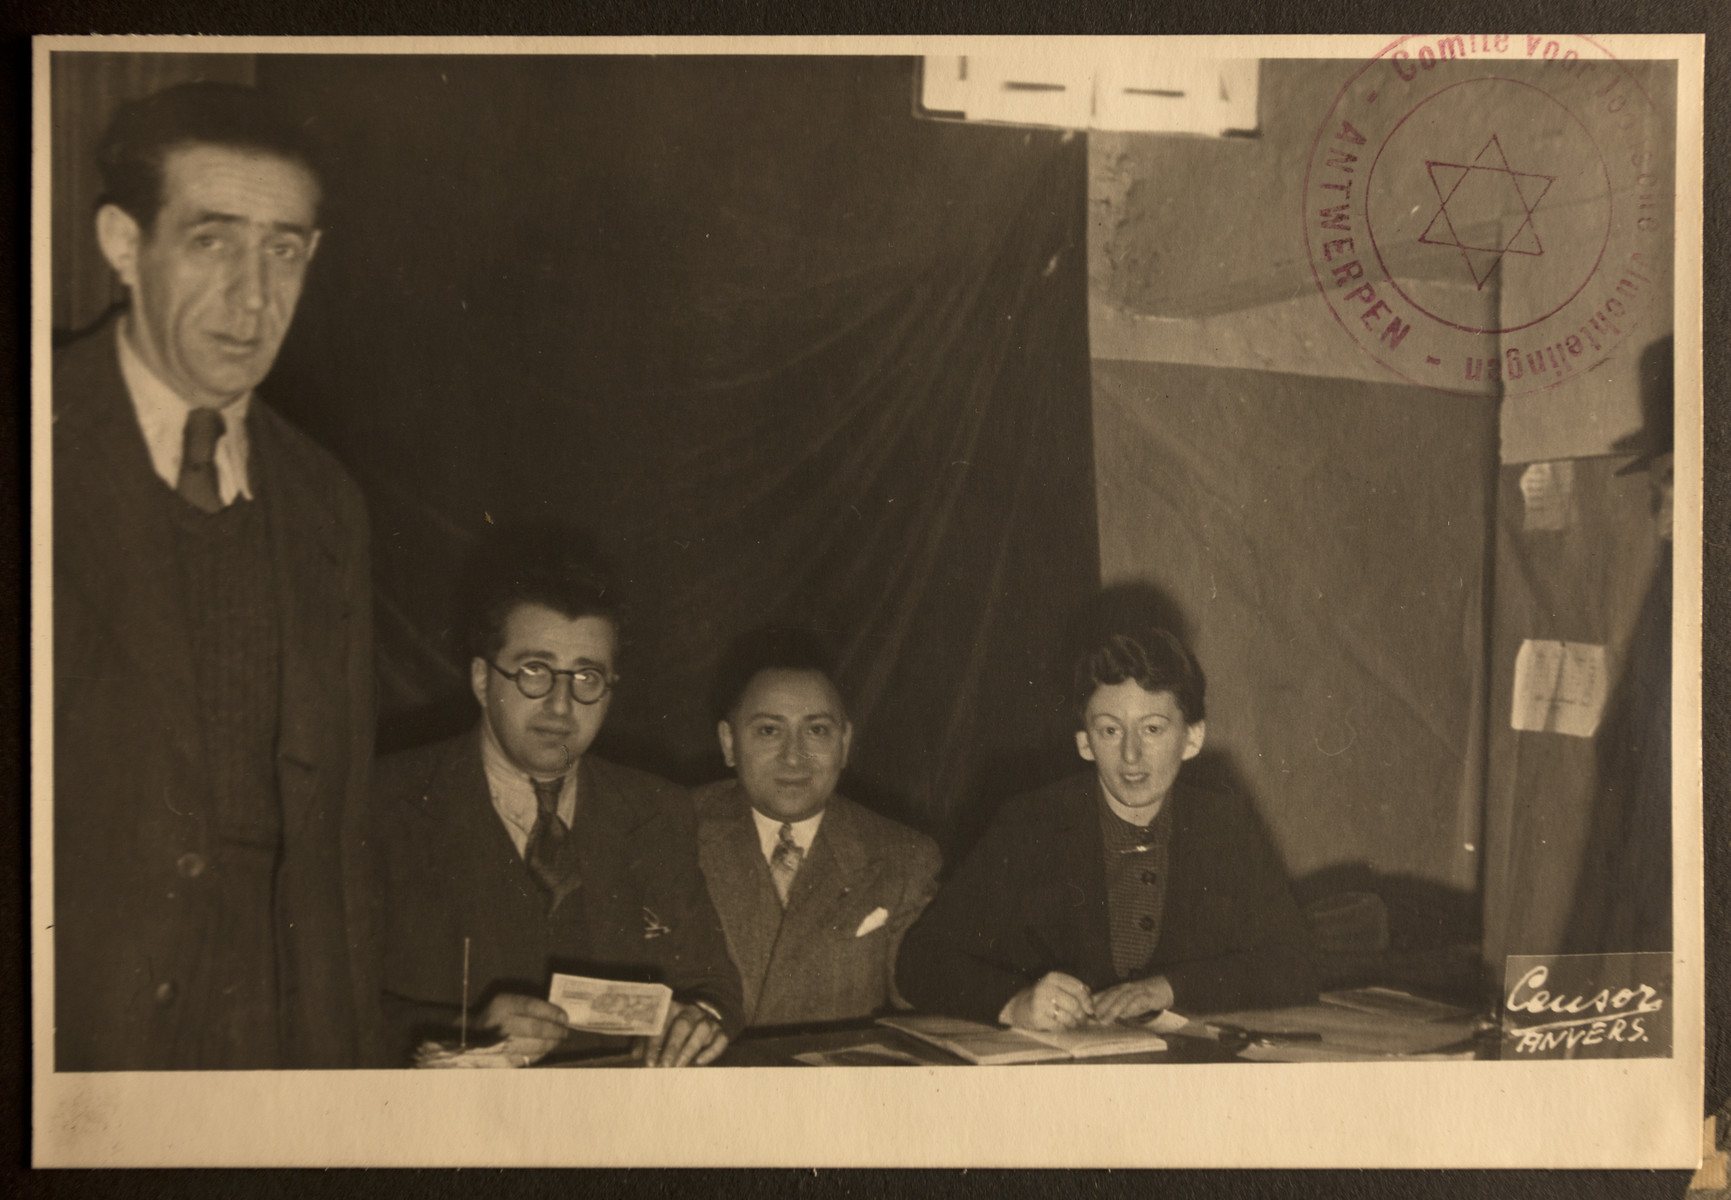 Group portrait of members of the Jewish Refugee Aid Committee of Antwerp.

Leopold Guttman is seated second from the left.